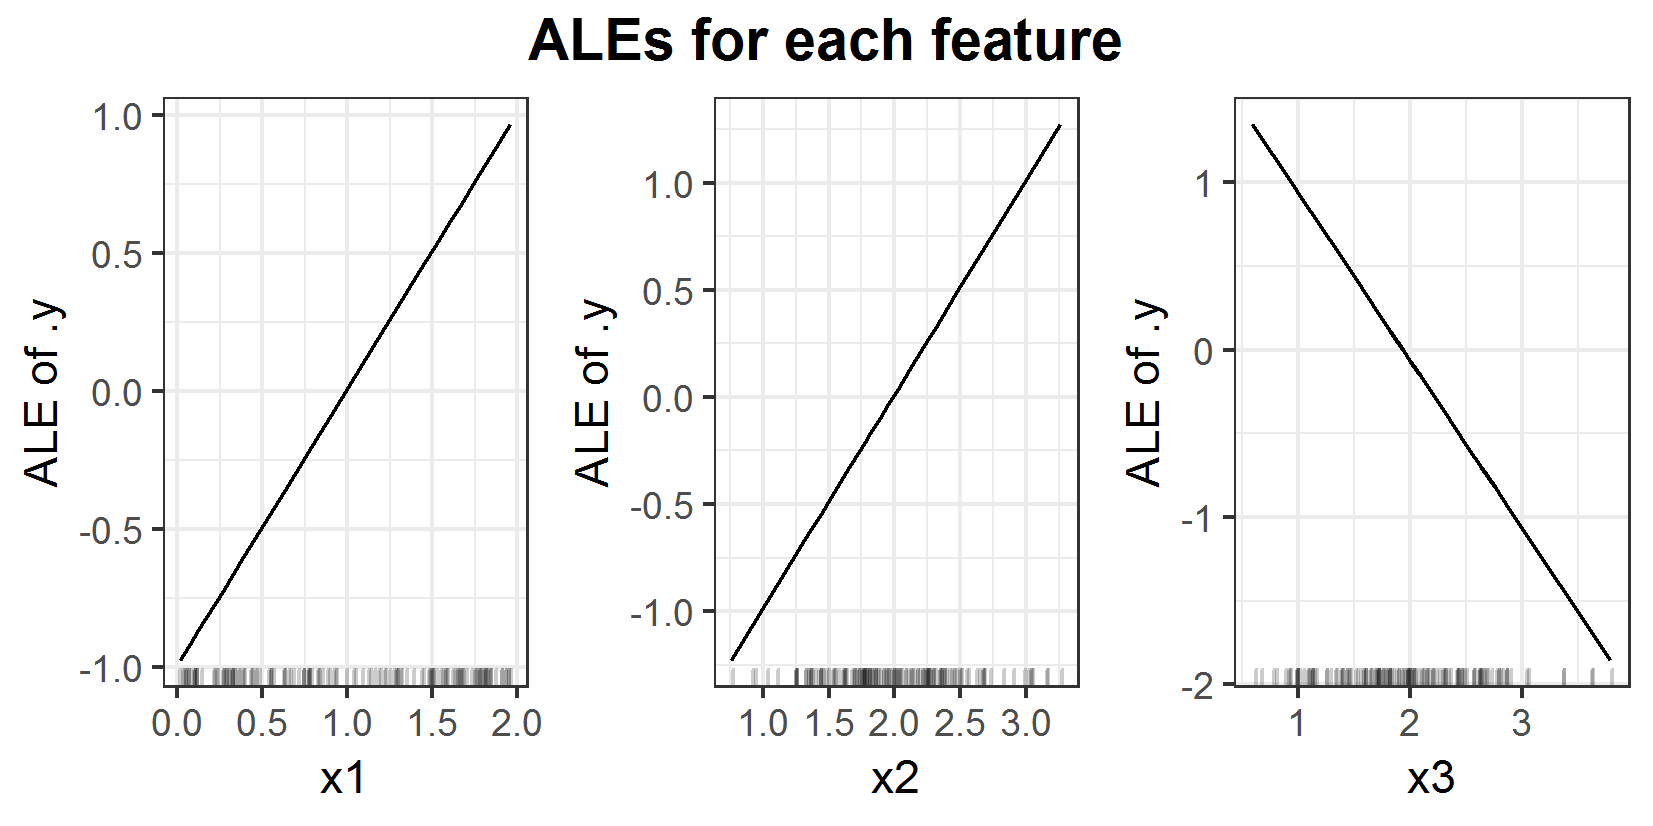 ALEs for prediction function \(f(x_1, x_2, x_3) = x_1 + x_2 - x_3\).